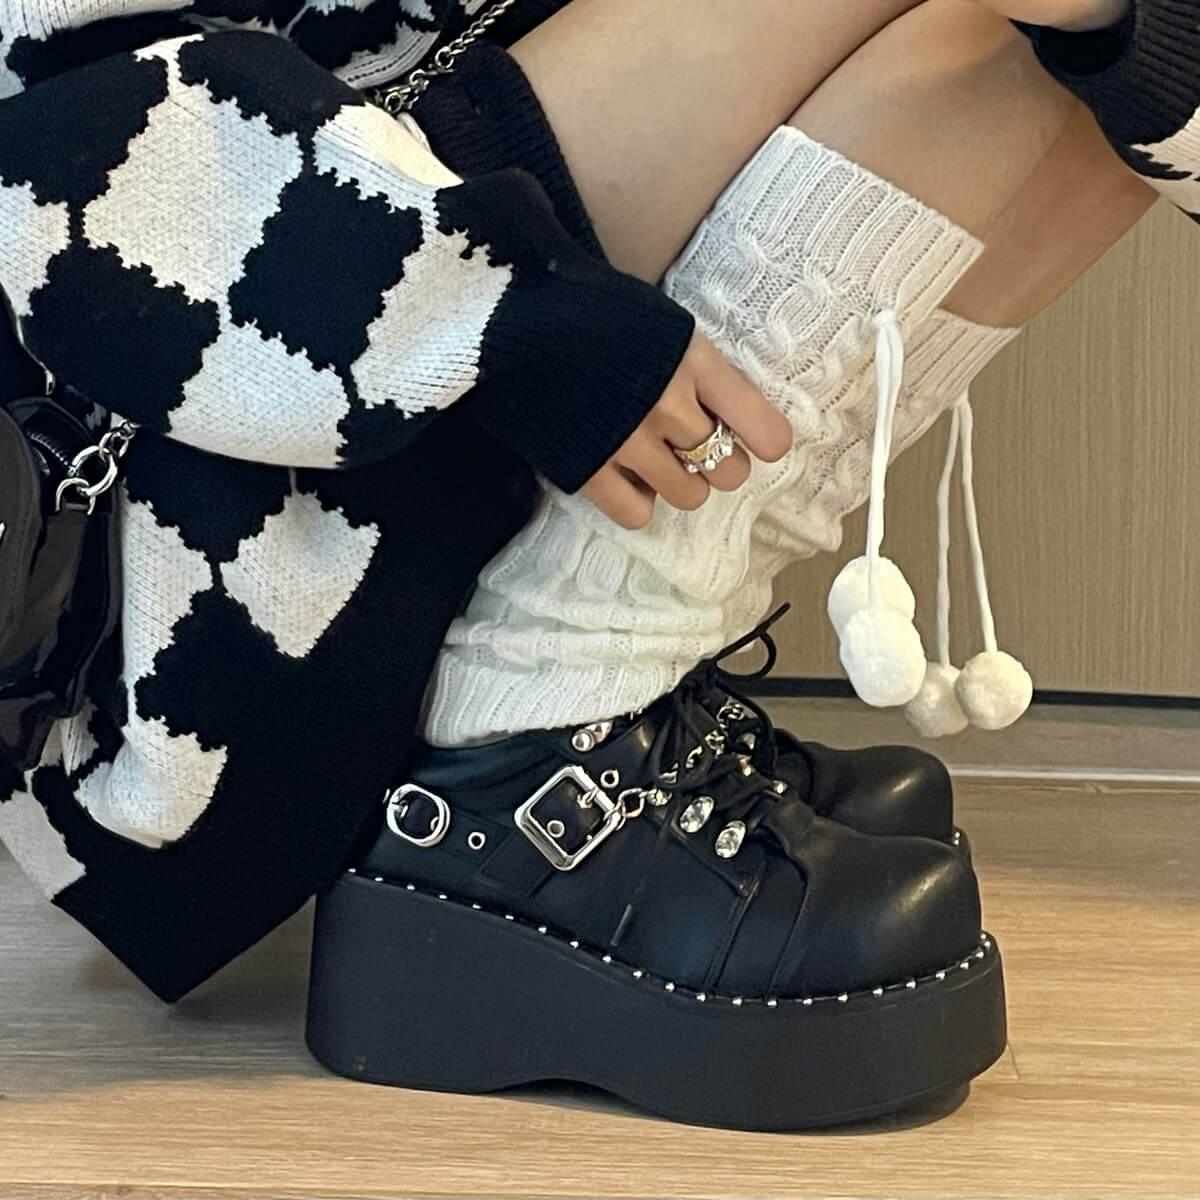 Dark Grunge Aesthetic Creeper Shoes - Aesthetic Clothes Shop